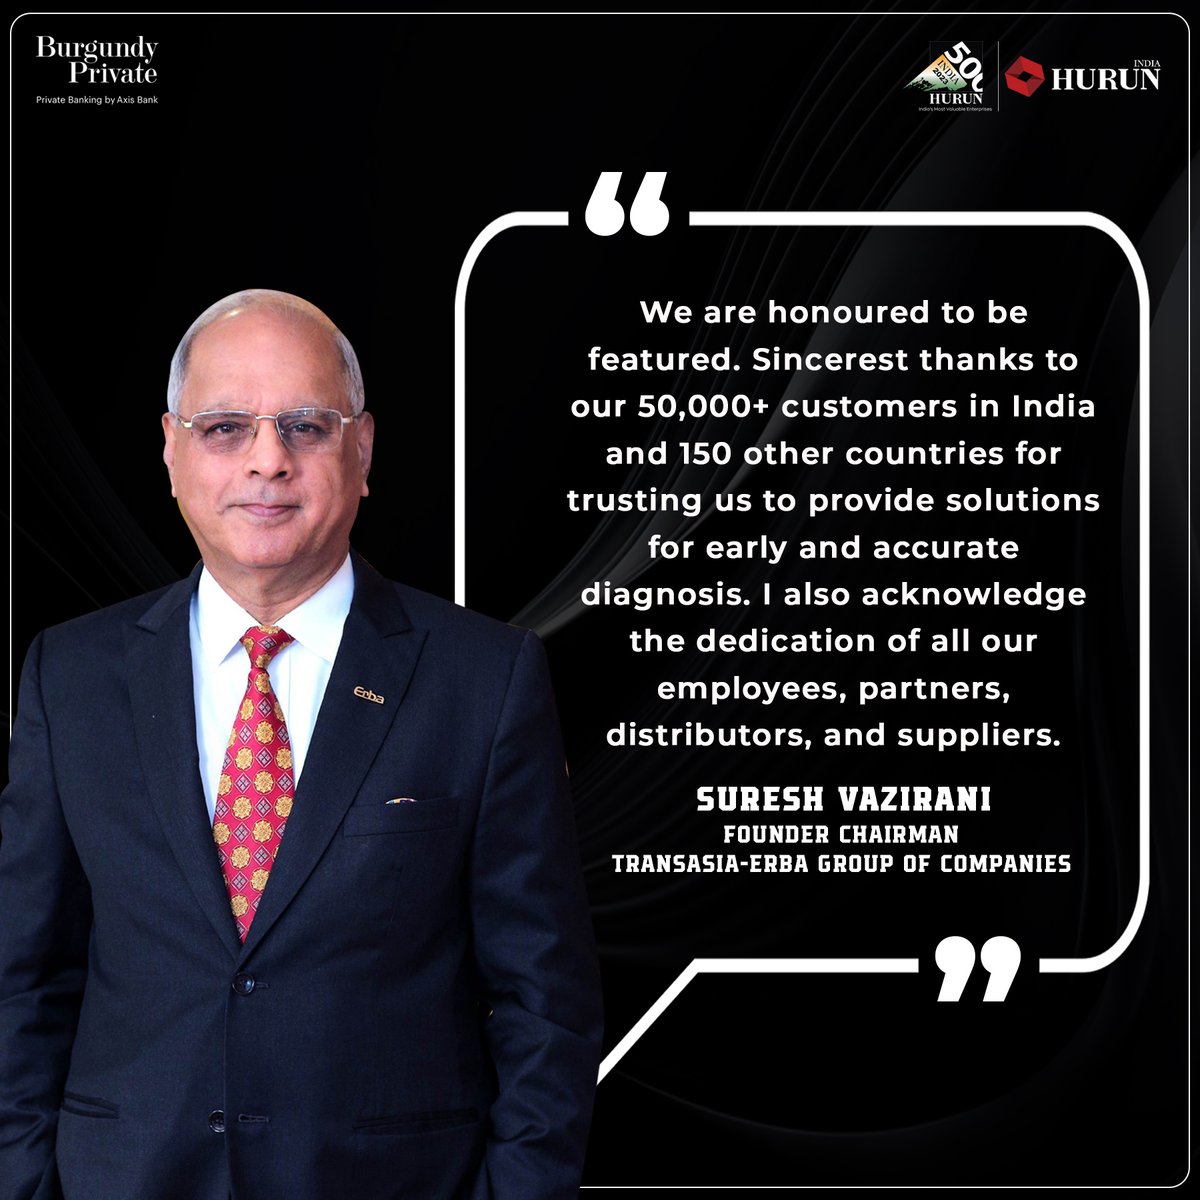 Suresh Vazirani, Founder Chairman of Transasia Bio-Medicals, shares his thoughts about being featured among the 2023 Burgundy Private Hurun India 500.
To access the report follow this link: hurunindia.com/blog/2023-burg…

#HurunIndia500 #HurunIndia #BurgundyPrivate #AxisBank